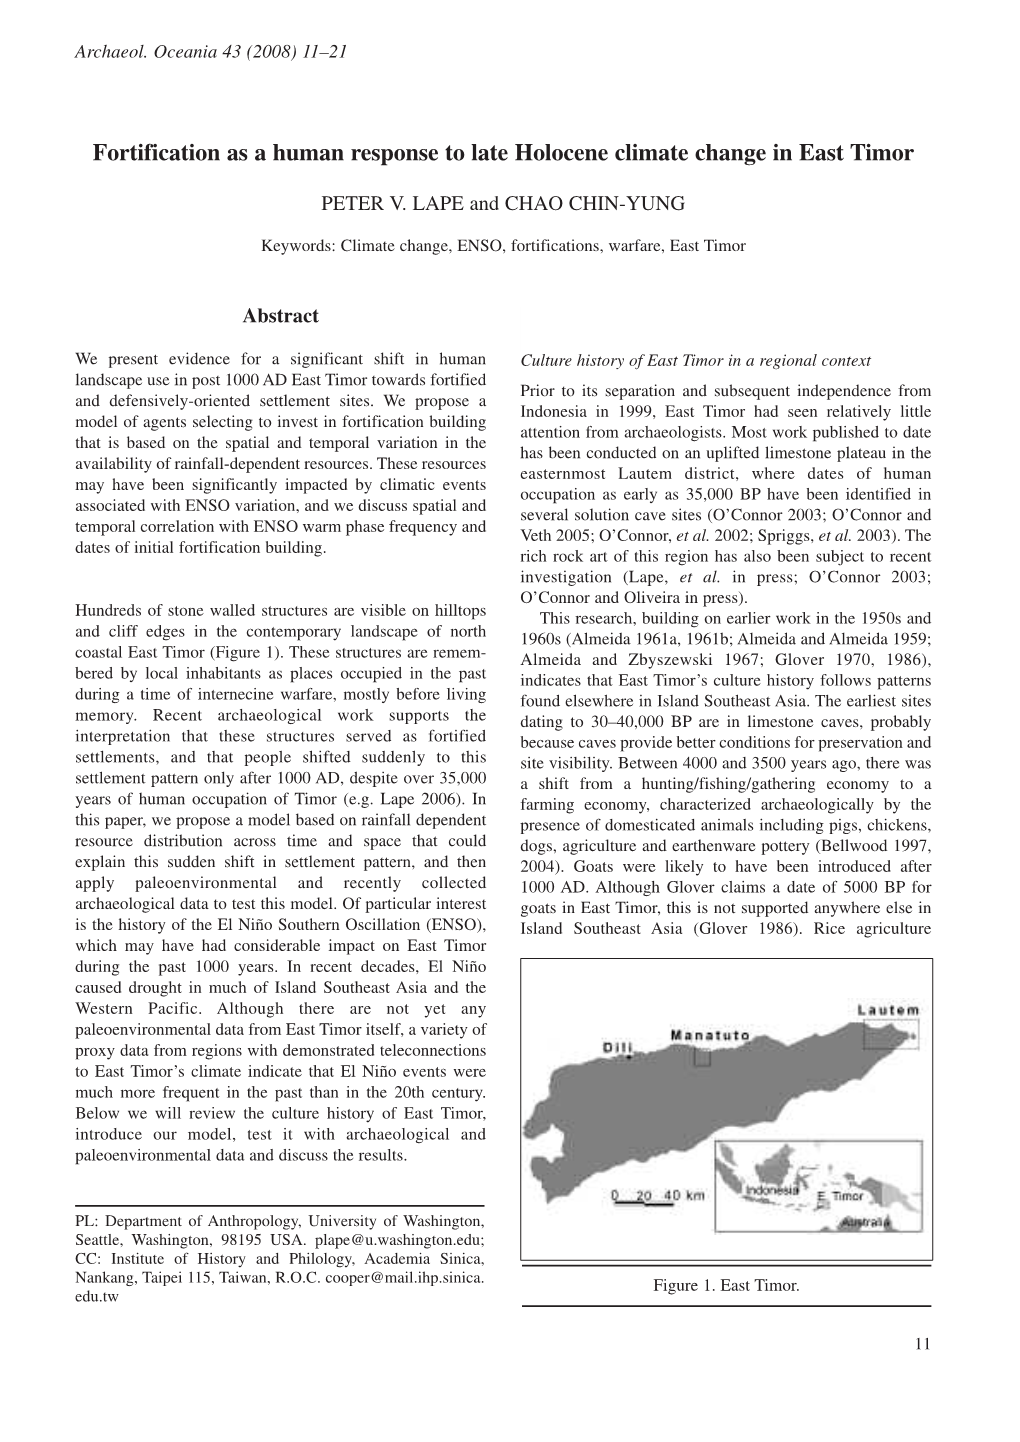 Fortification As a Human Response to Late Holocene Climate Change in East Timor